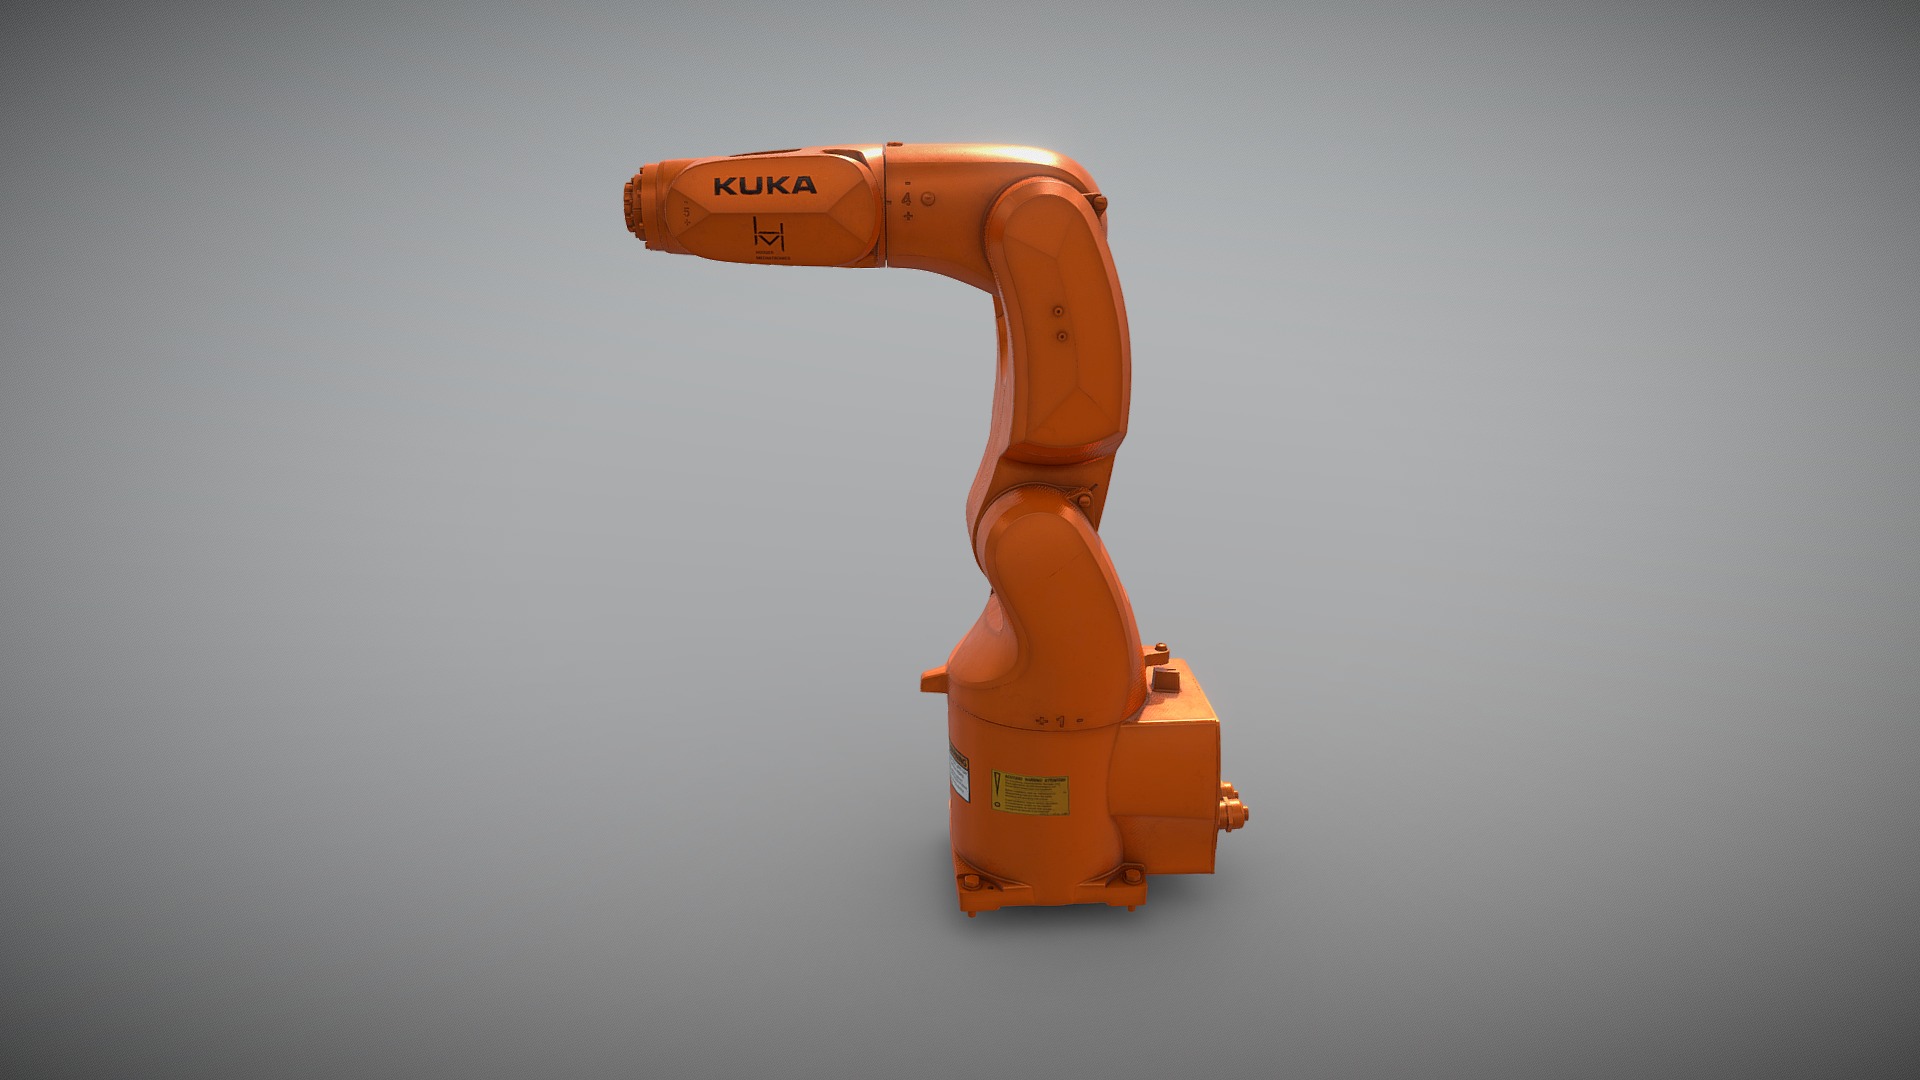 3D model kuka - This is a 3D model of the kuka. The 3D model is about an orange and white drill.